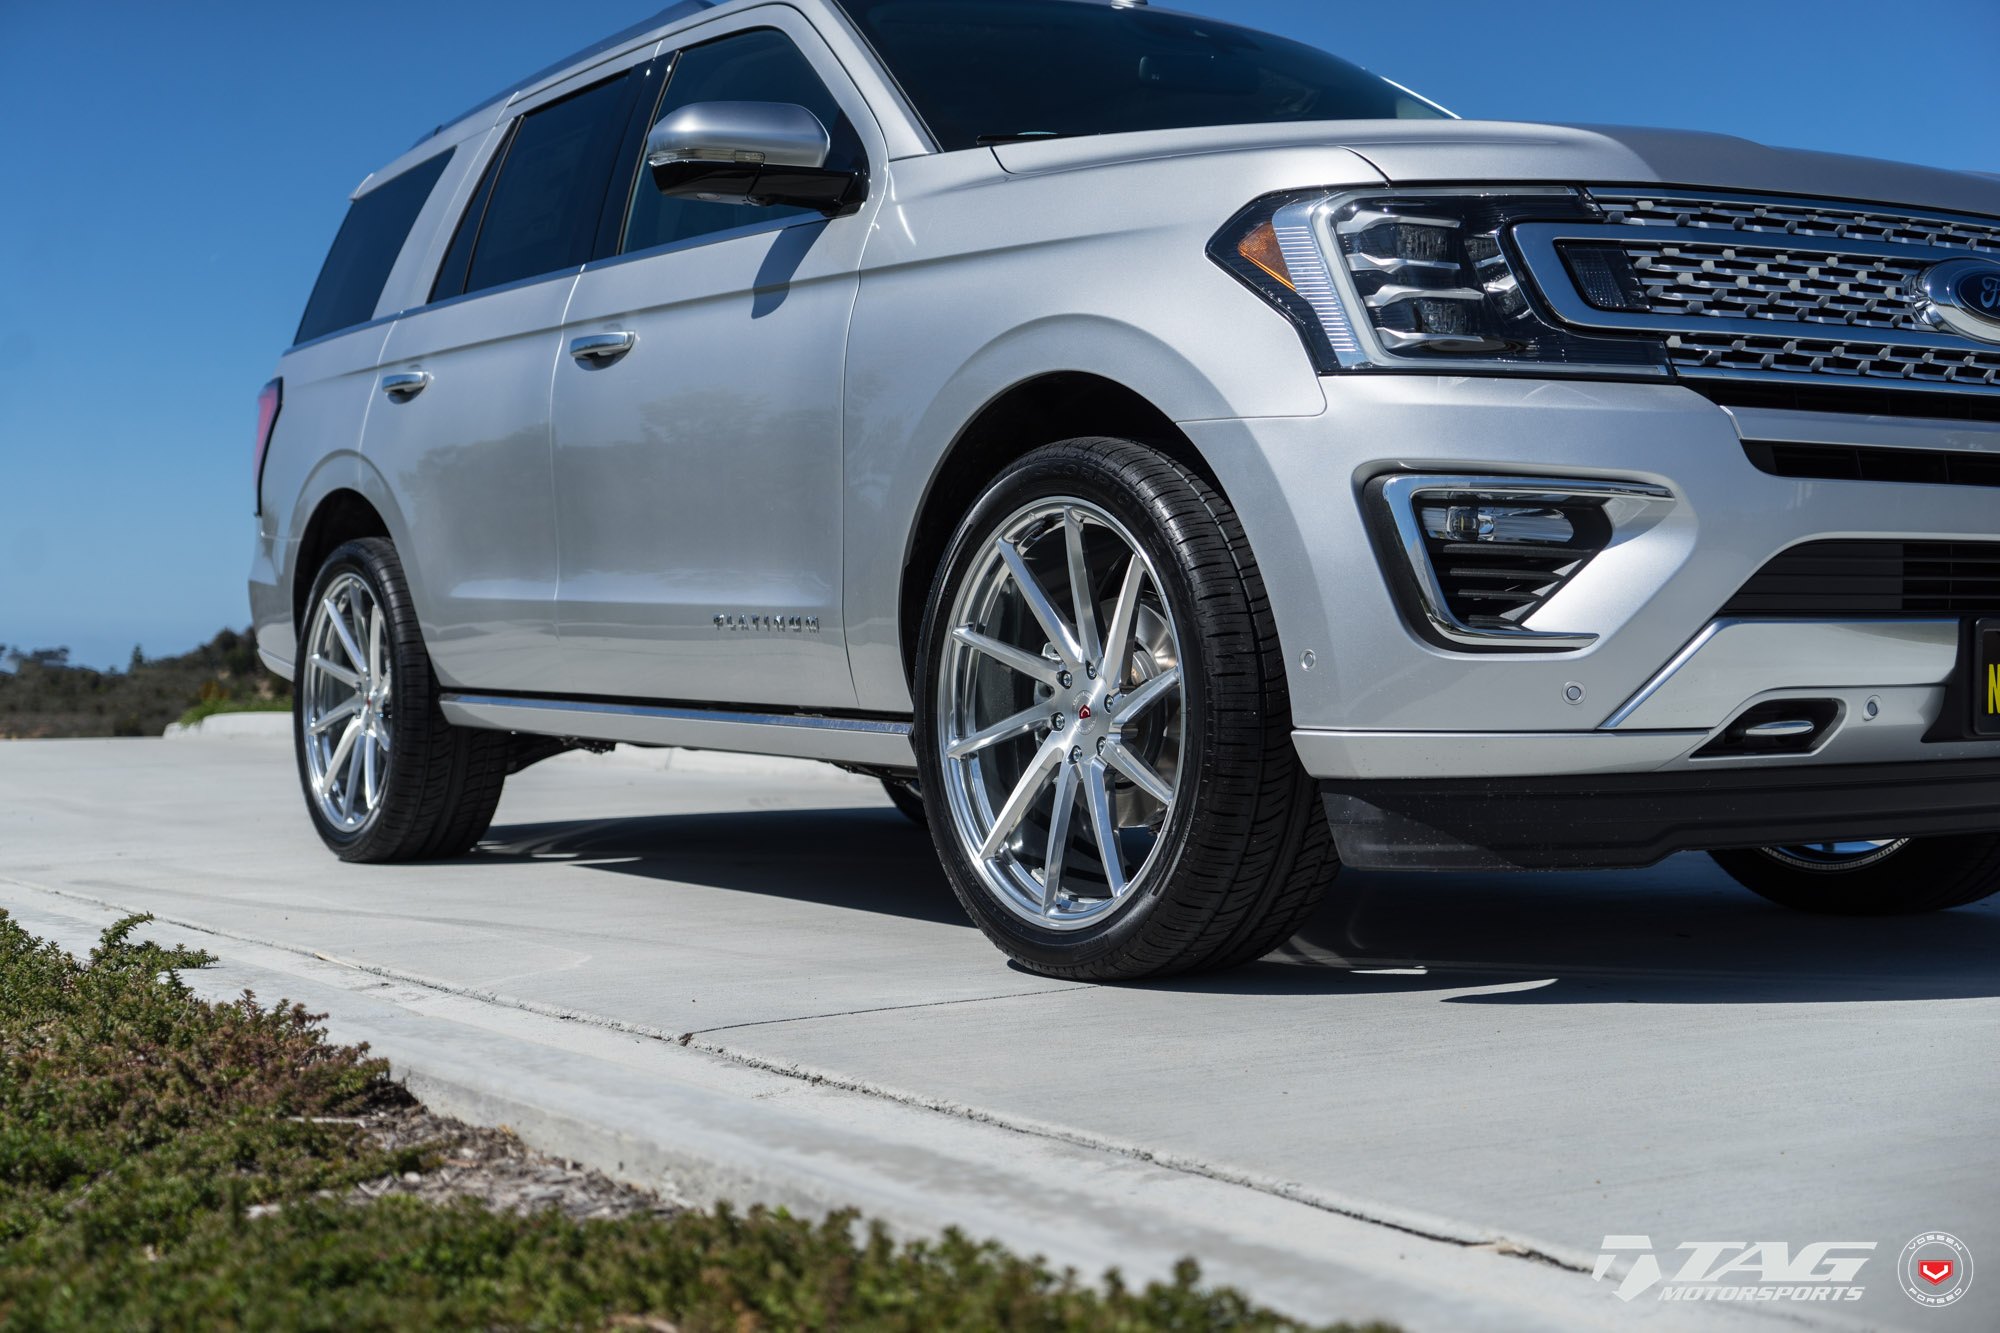 Silver Ford Expedition with Custom Vossen Wheels - Photo by Vossen